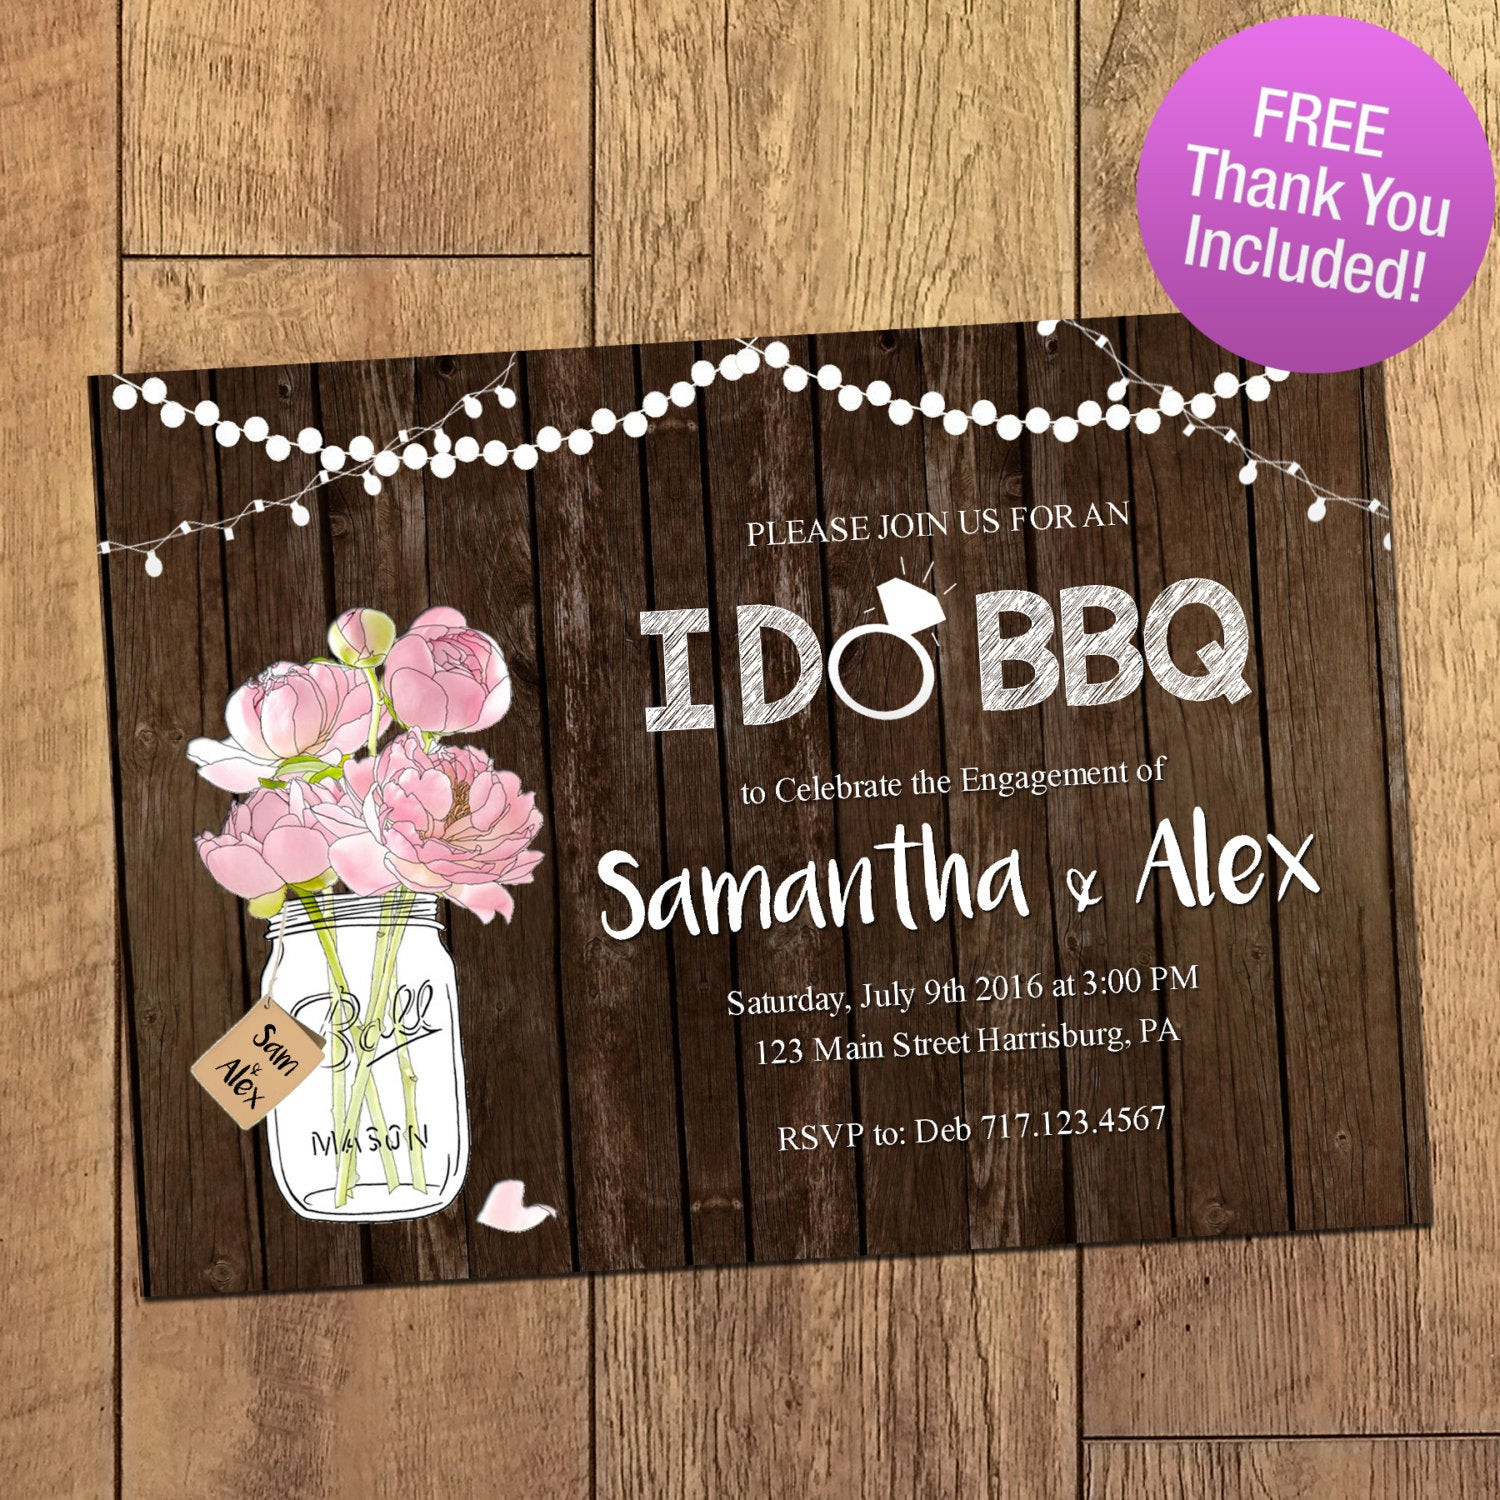 Engagement Party Invitations Ideas
 I DO BBQ Invitation Rustic Mason Jar Engagement Party